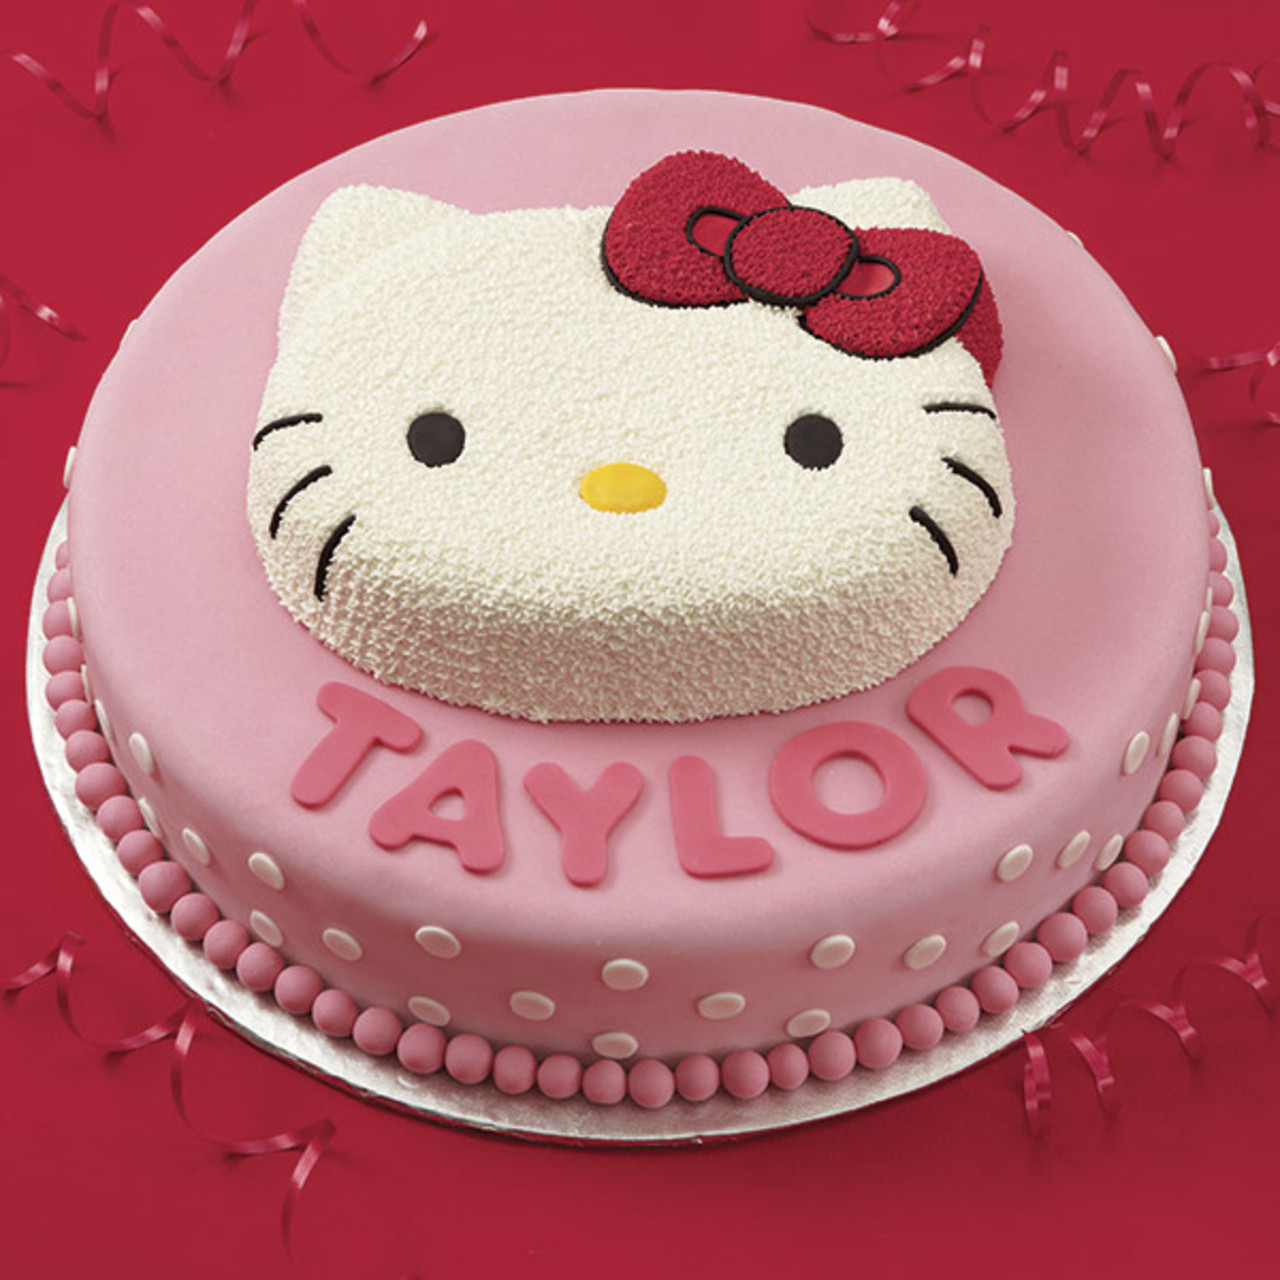 Amazon.com: 7.5 Inch Edible Cake Toppers – Hello Kitty Themed Birthday  Party Collection of Edible Cake Decorations : Grocery & Gourmet Food